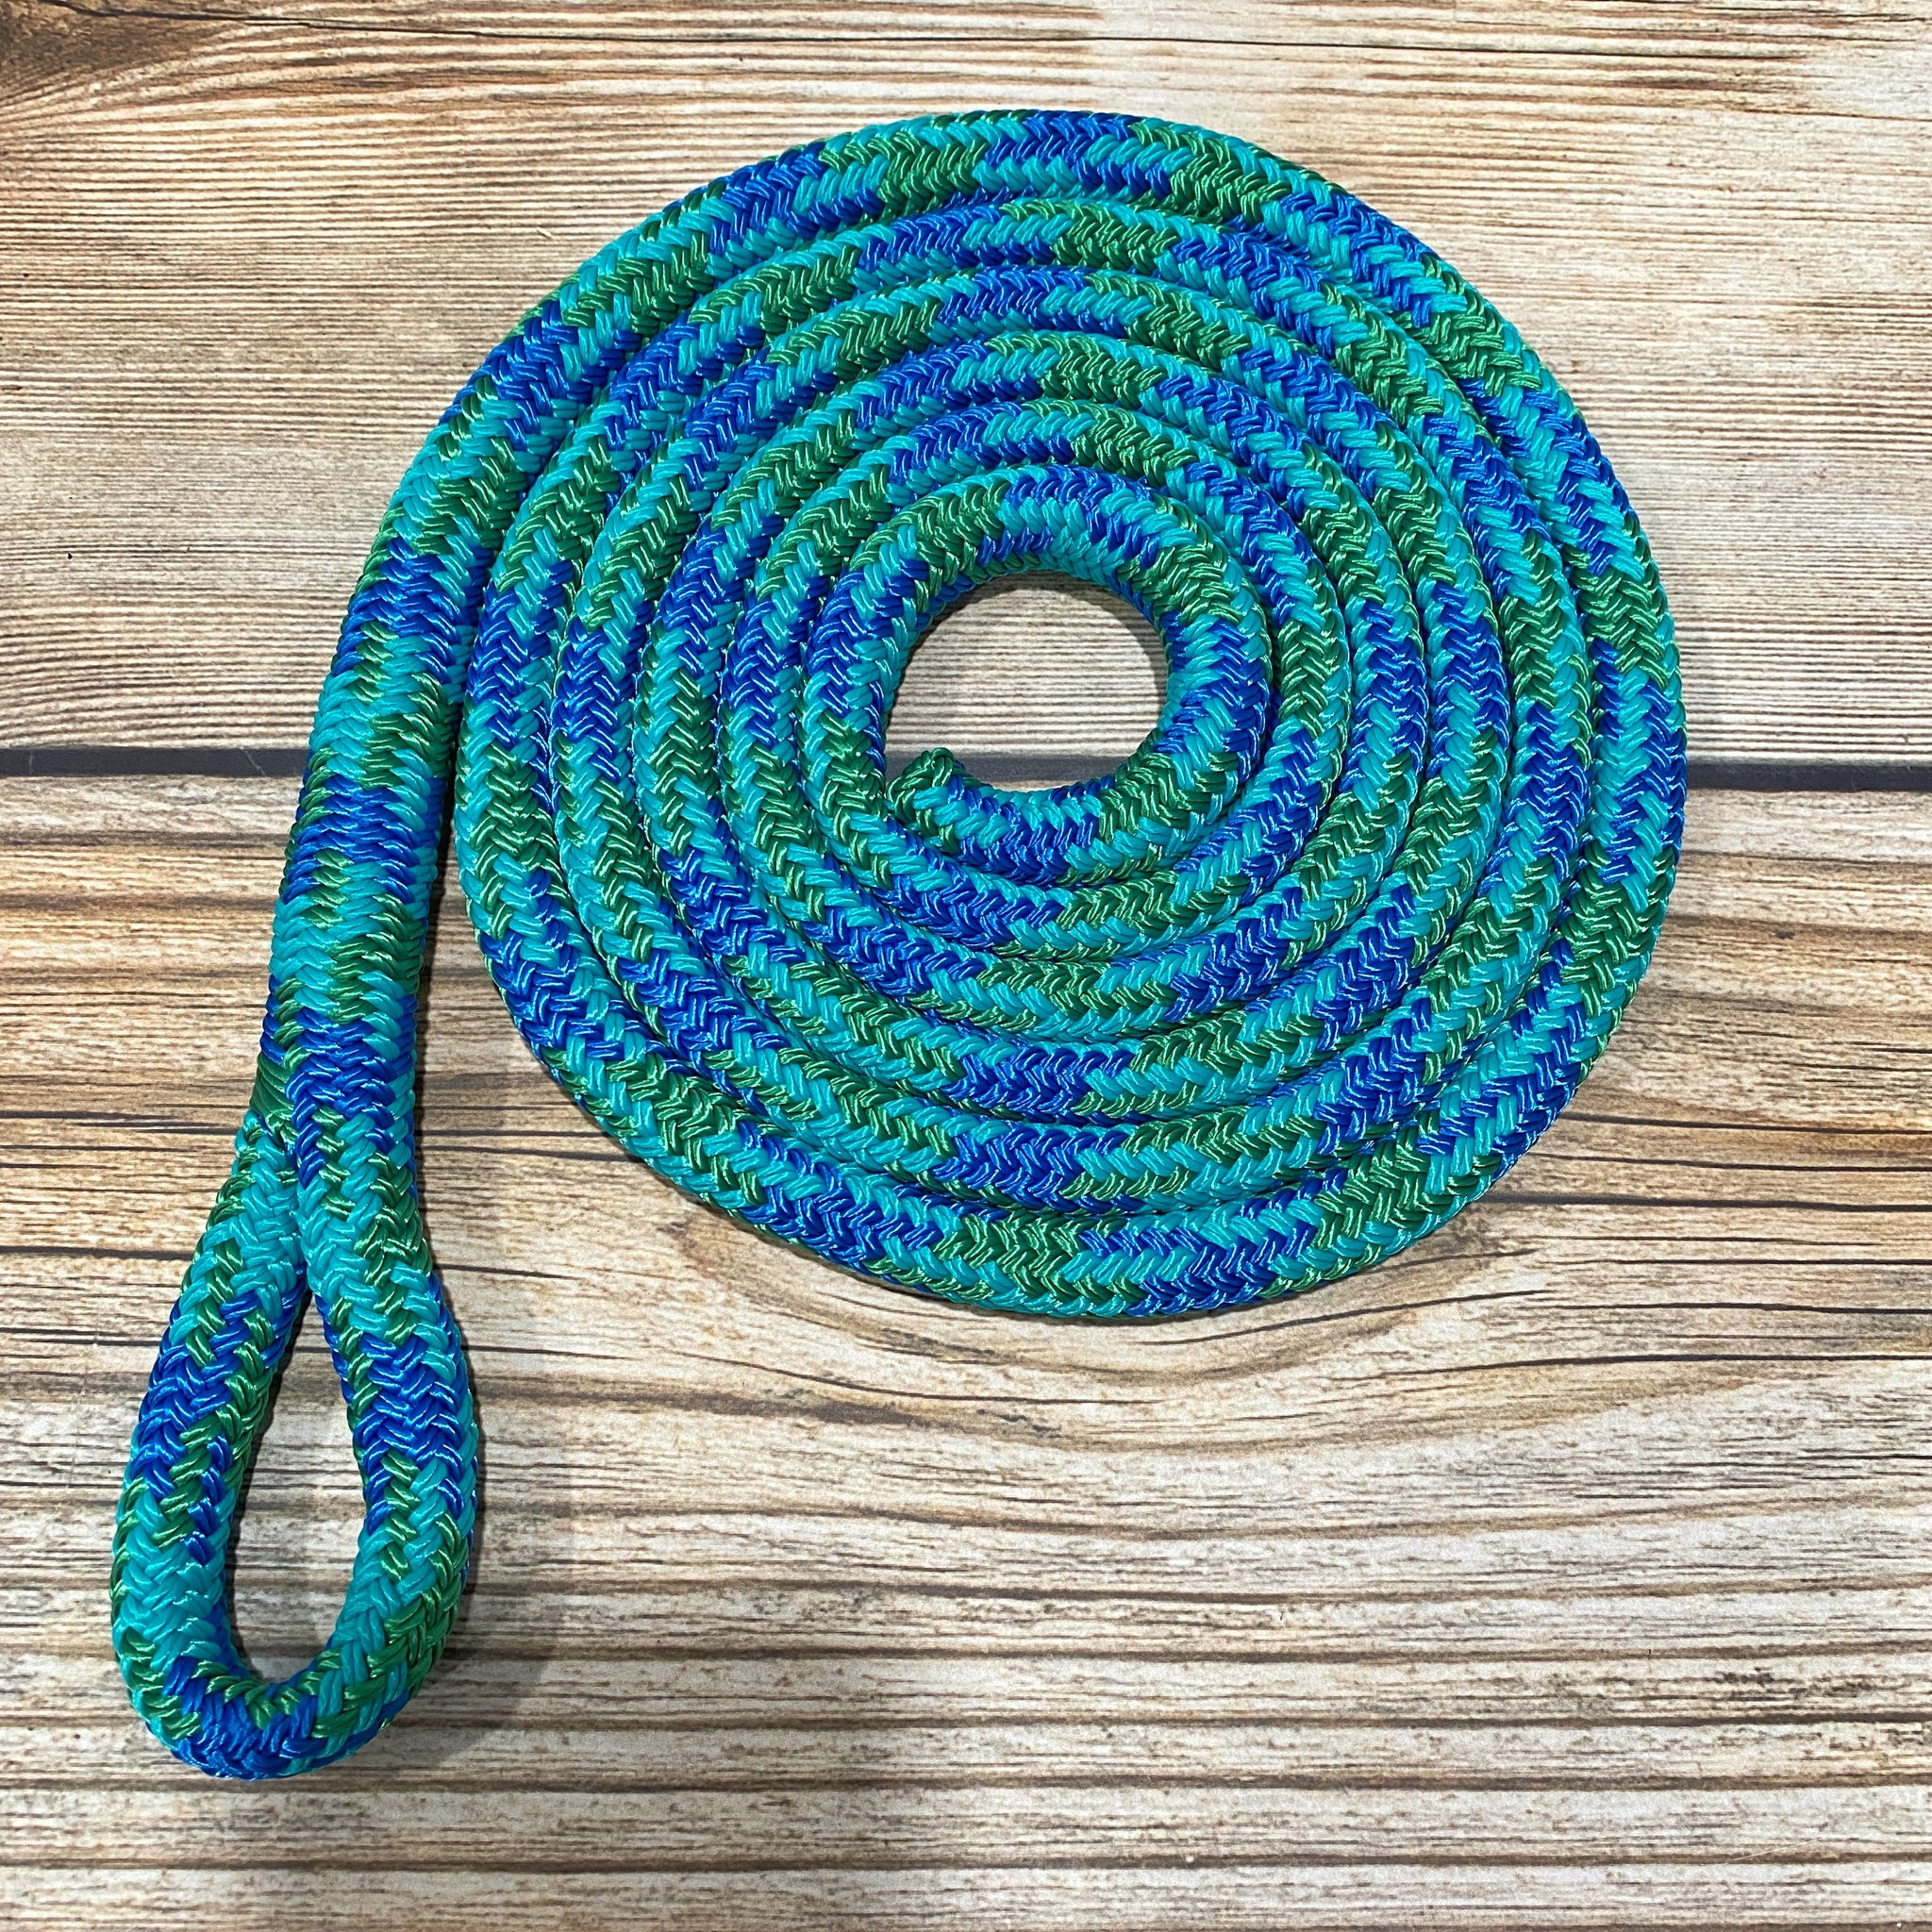 8' Blue/Turquoise/Kelly Green Lead Rope